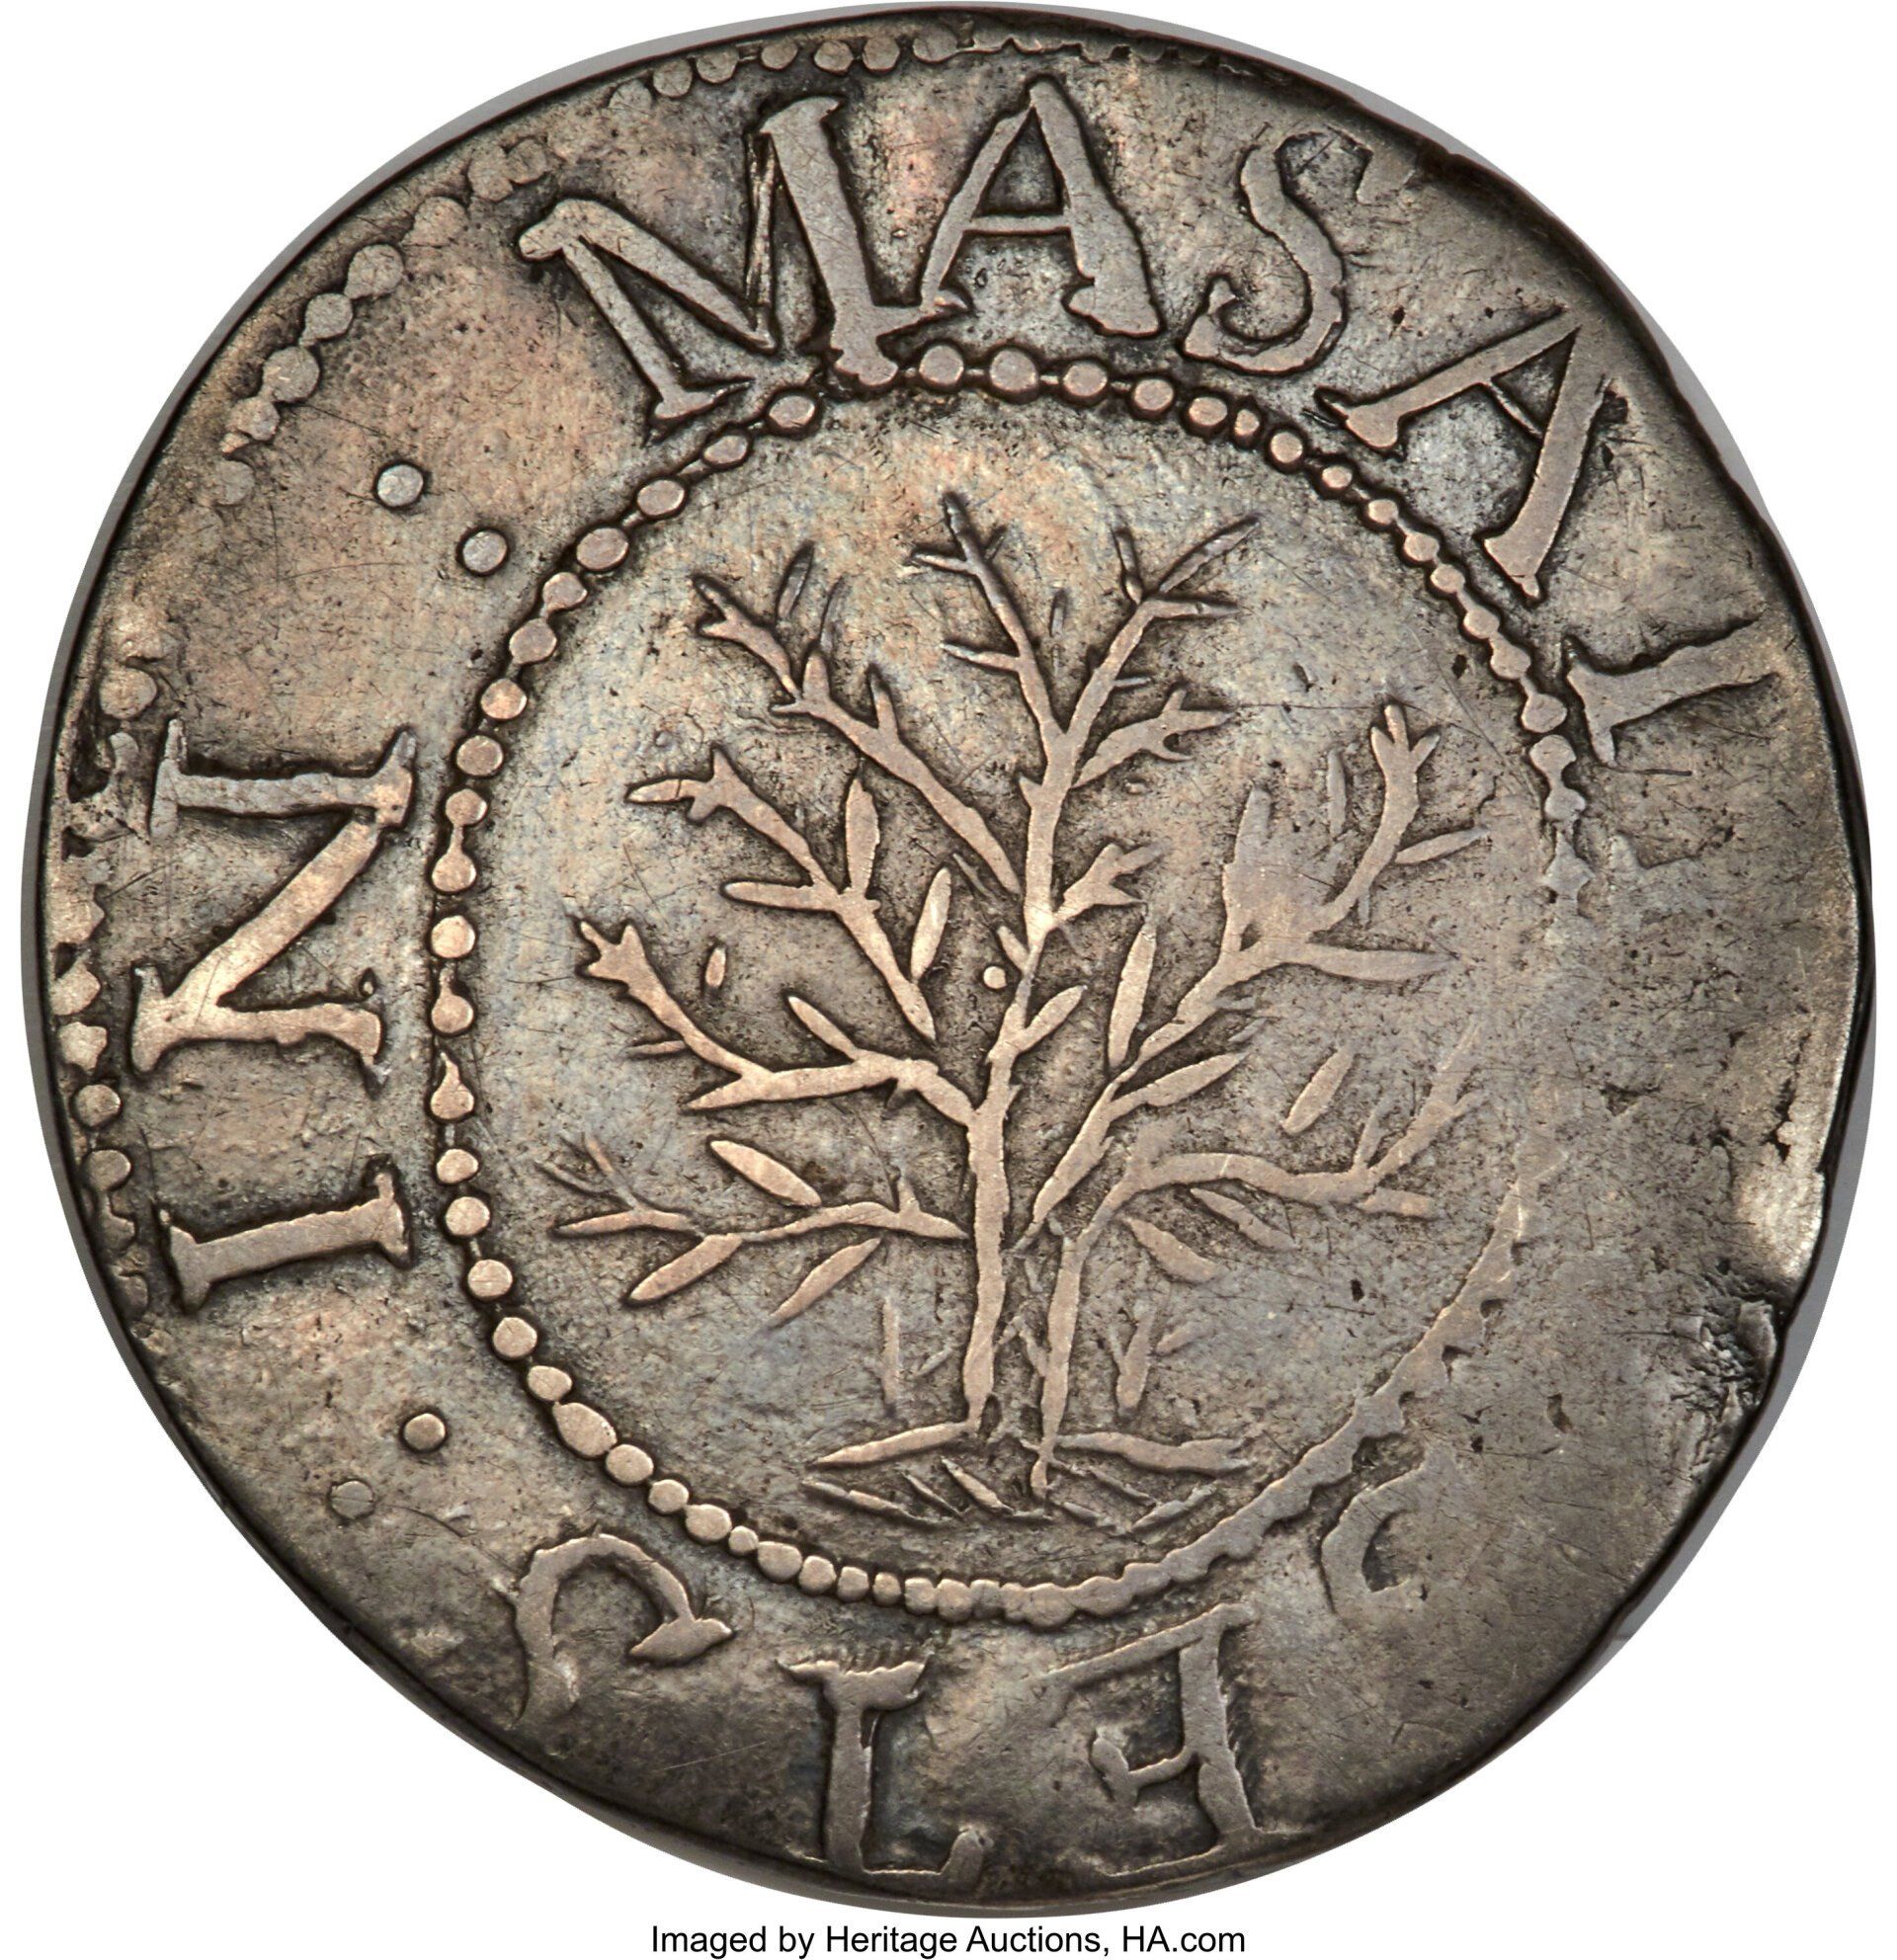 1652 Oak Tree Shilling Offered By Heritage Auctions, HA.com